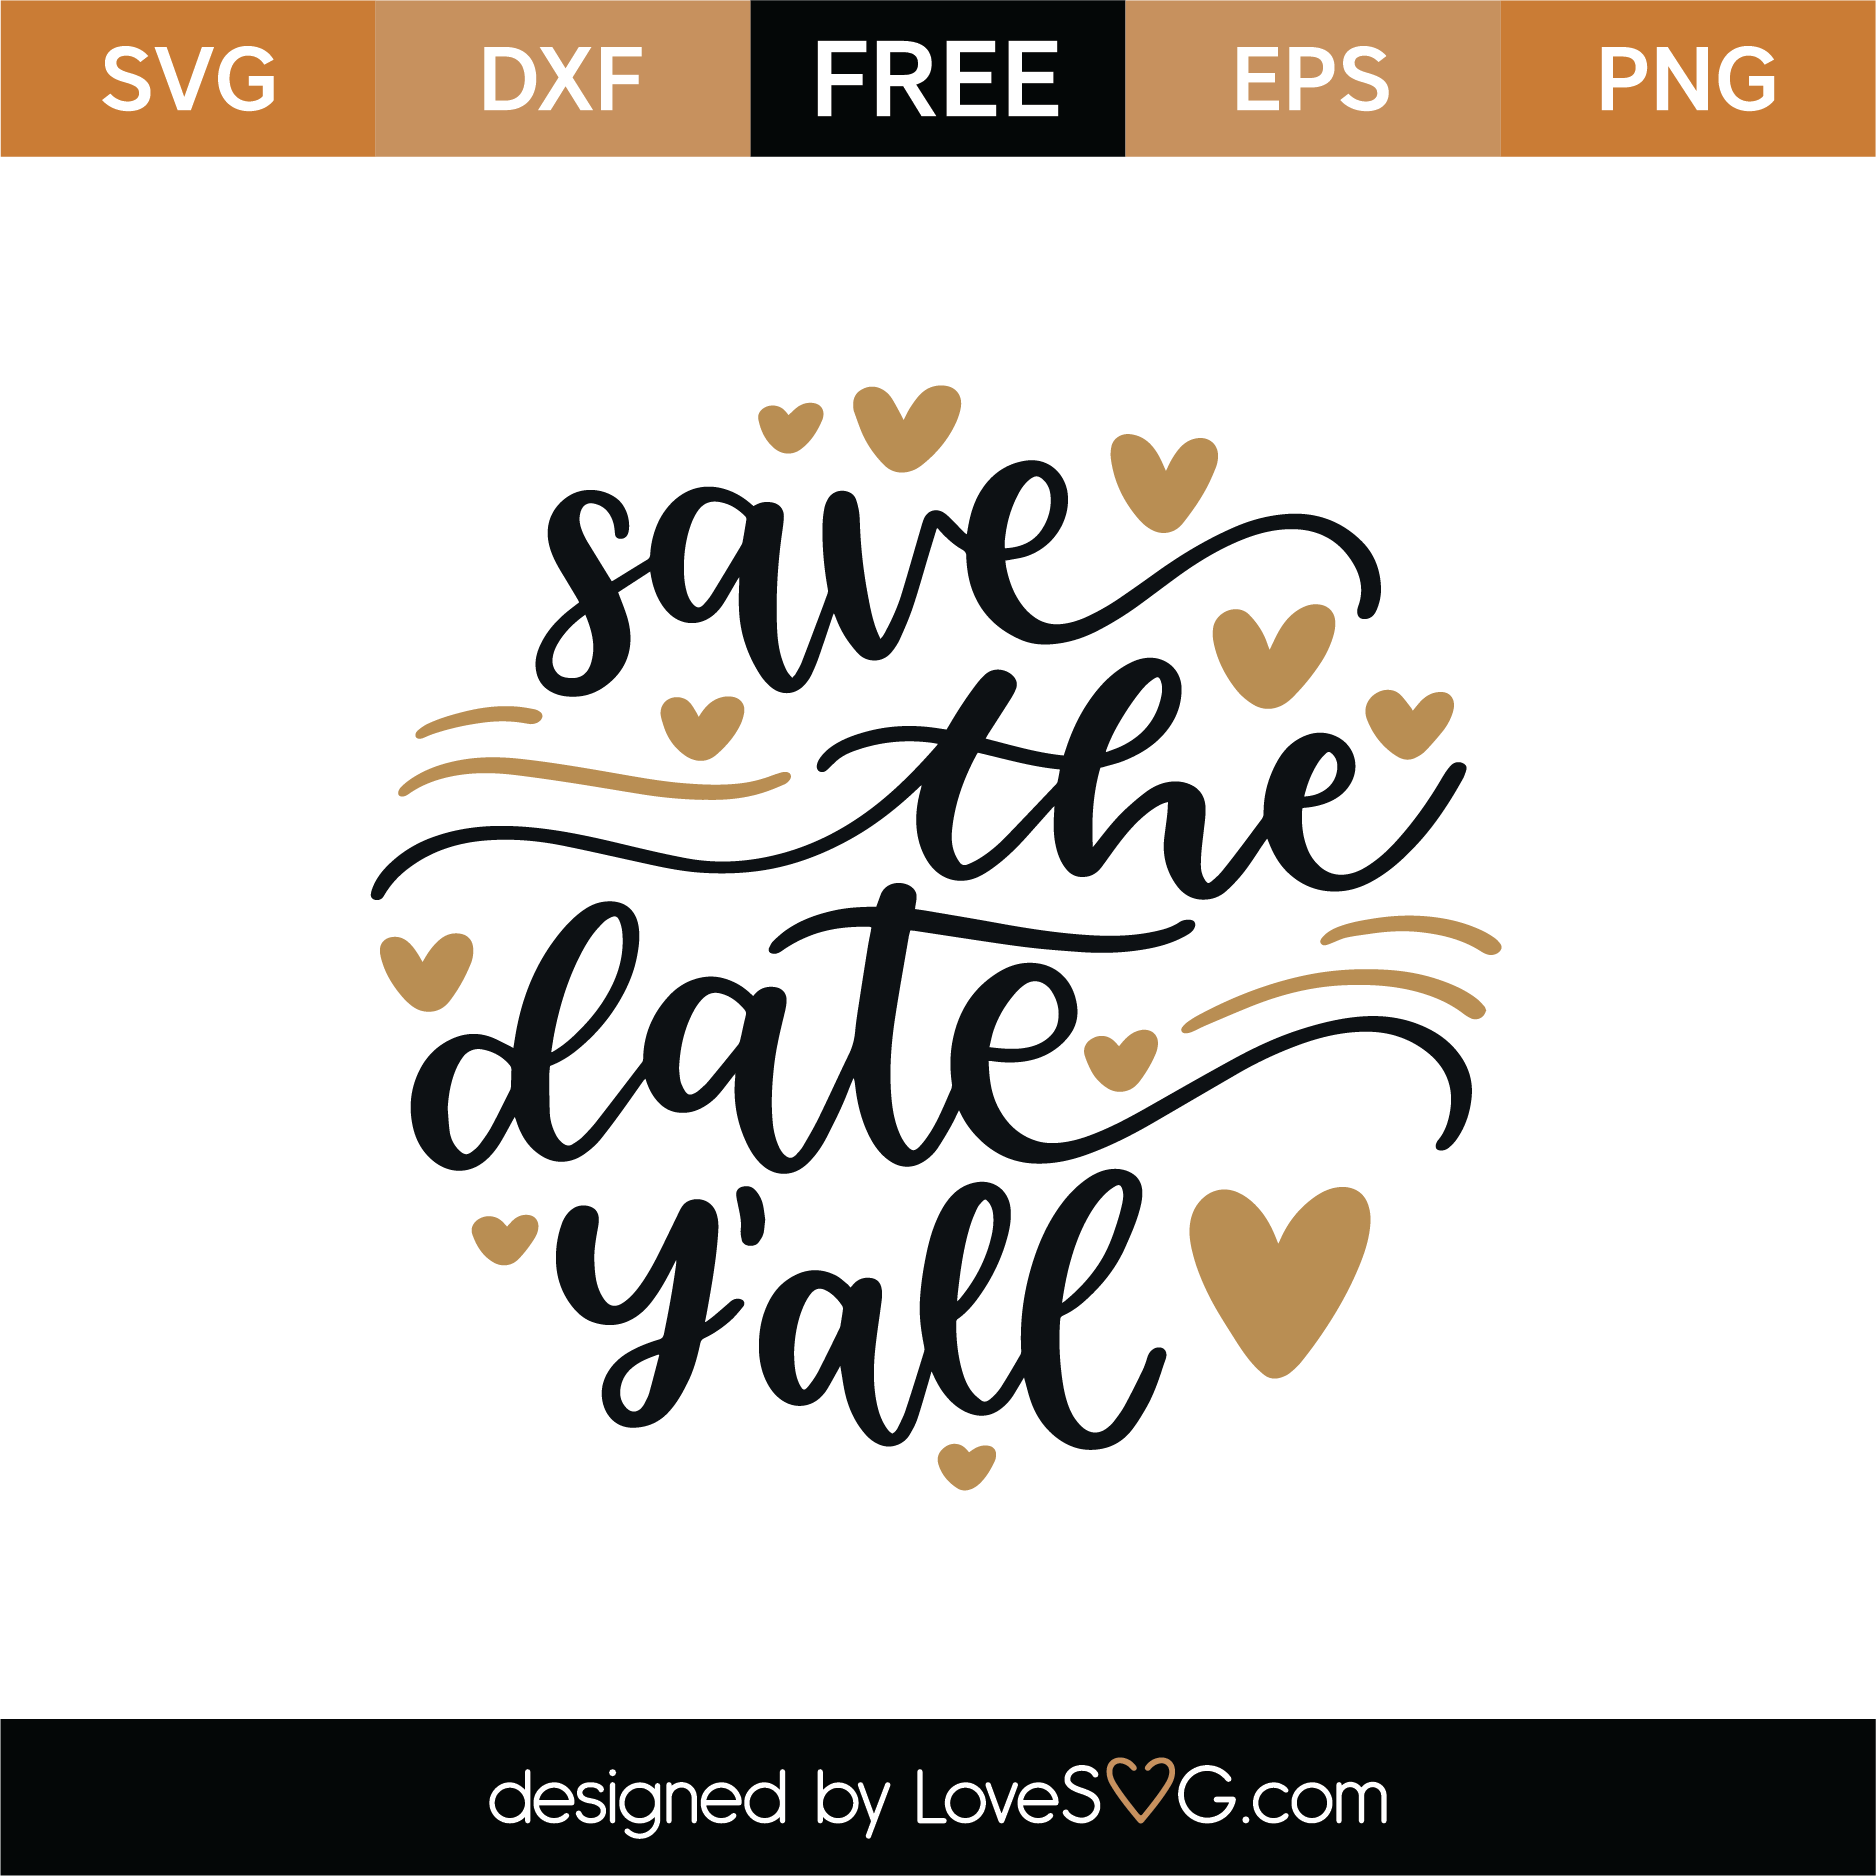 Free Save The Date Y'all SVG Cut File | Lovesvg.com